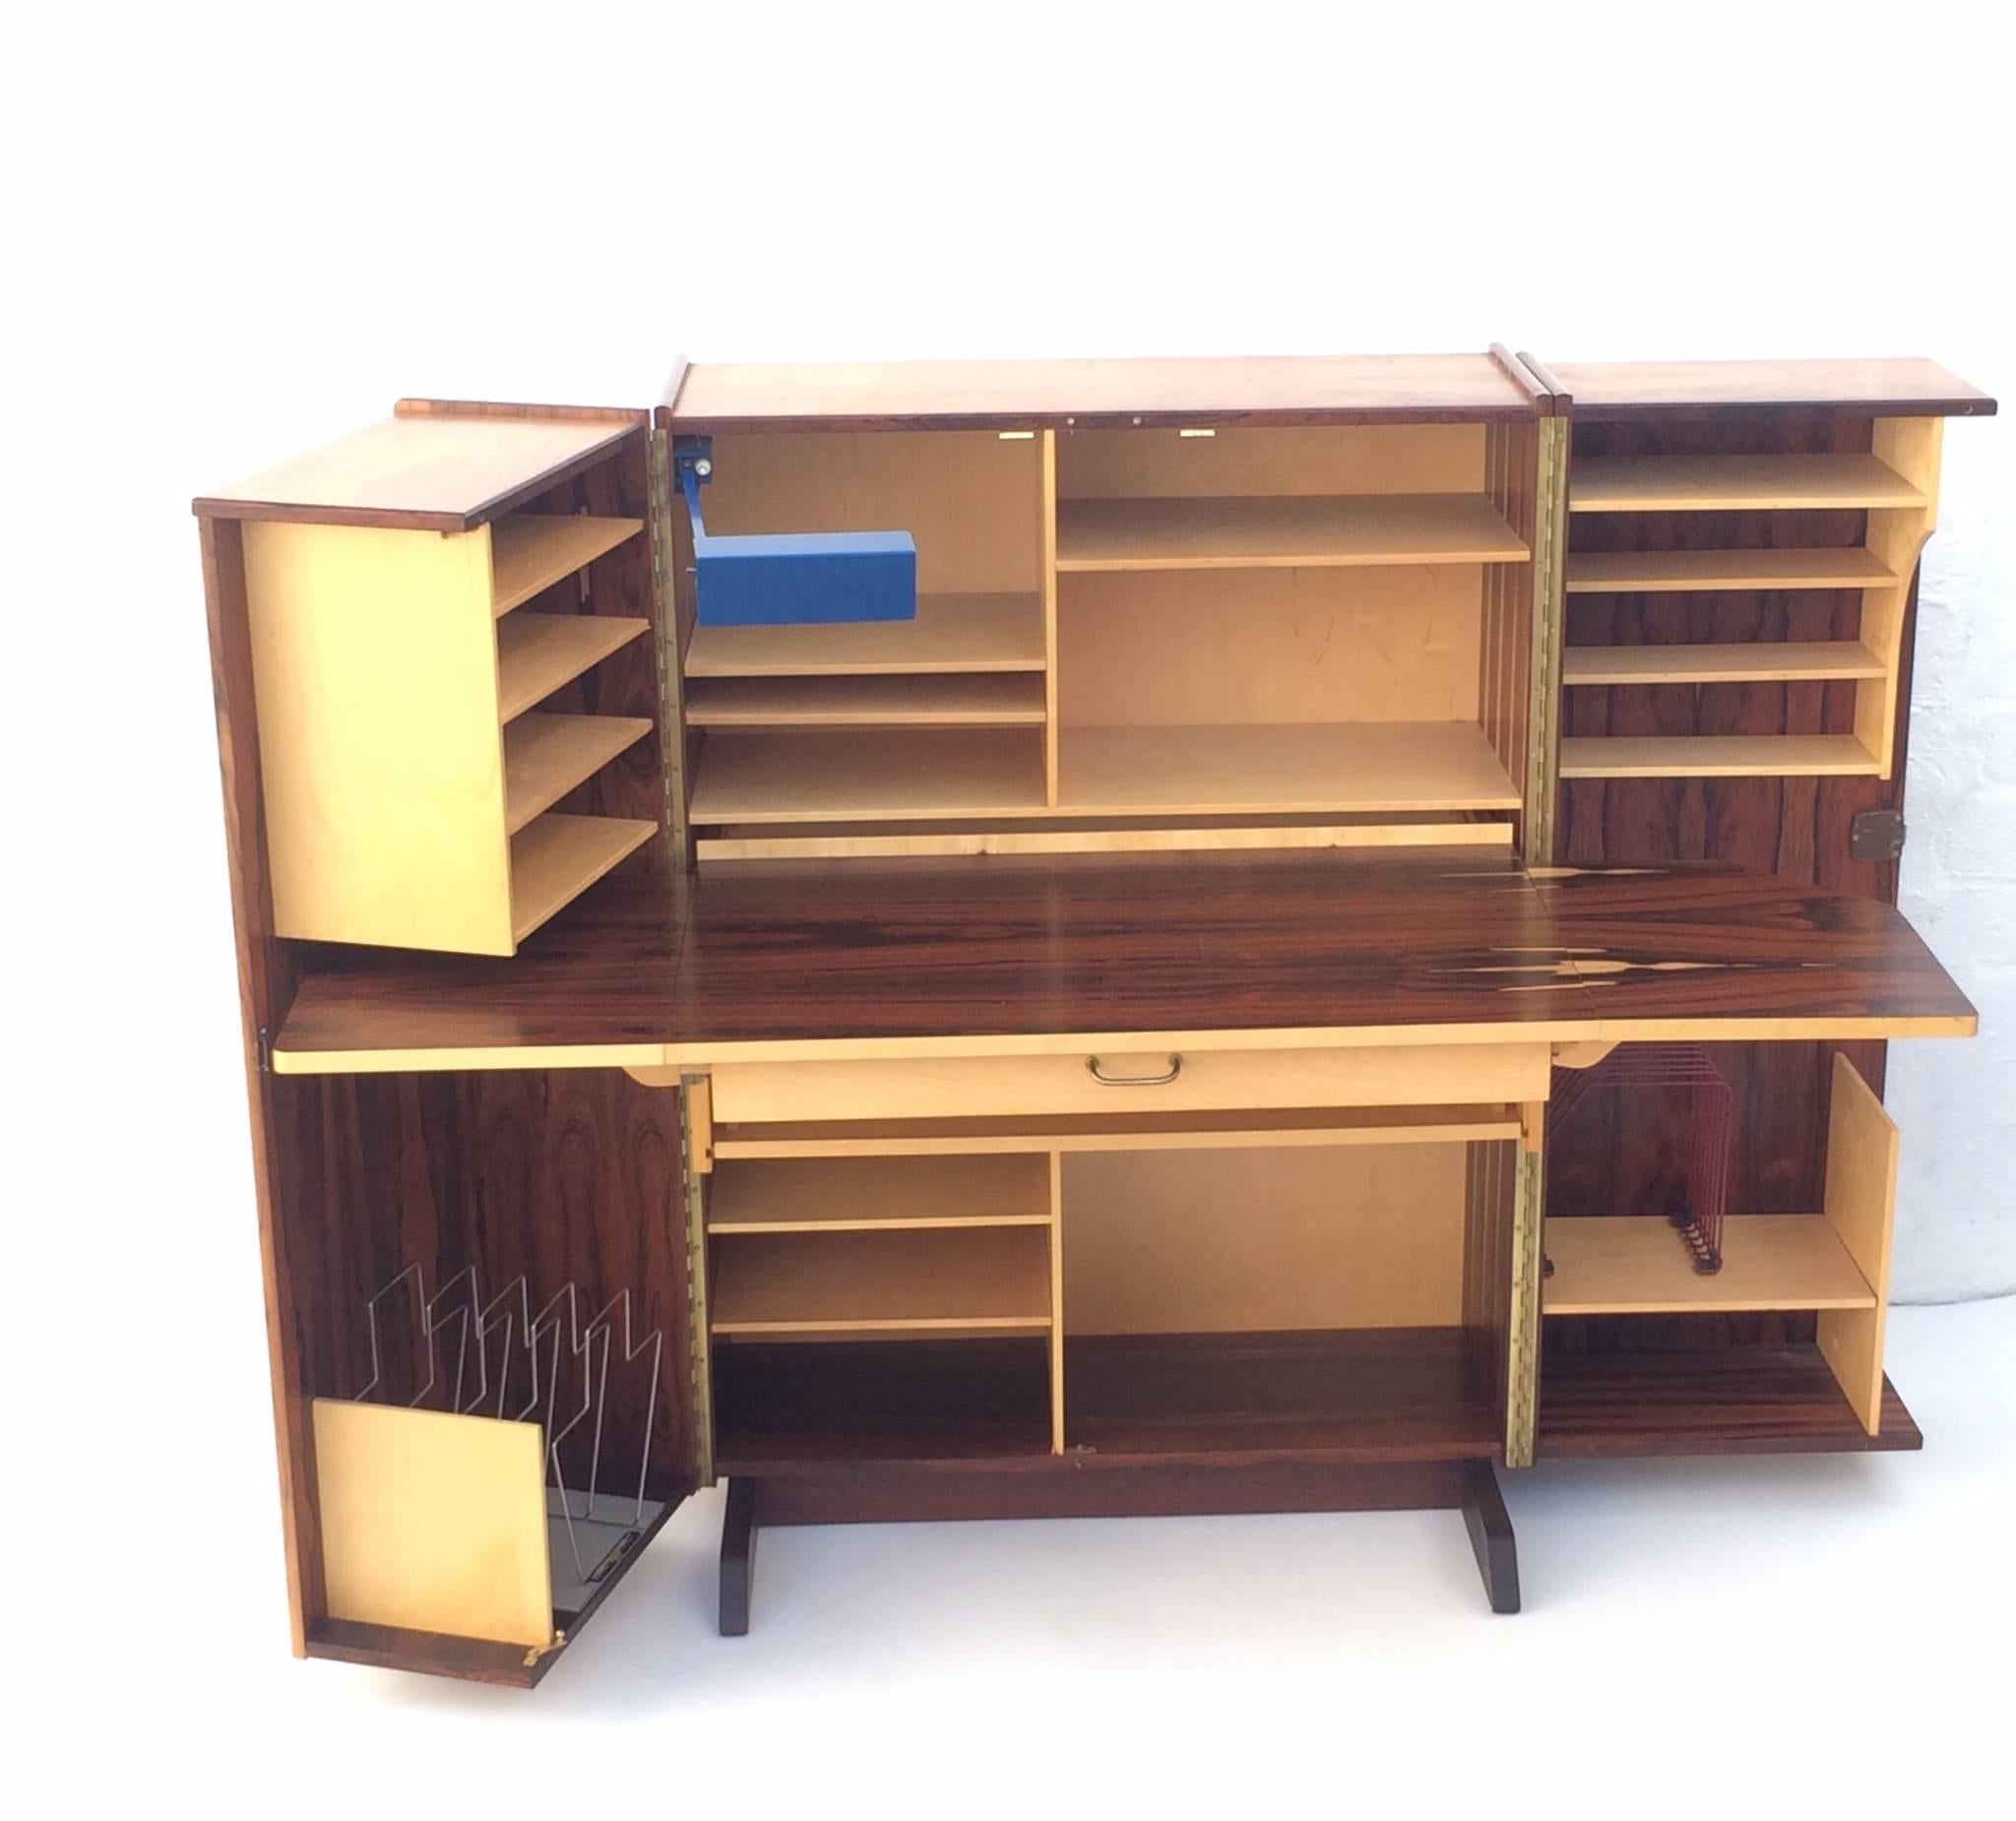 Rare 1960s, Norwegian rosewood fold-up desk.
This amazing desk folds up into a compact box!
Great for a studio space or small room.
When closed it measures 45